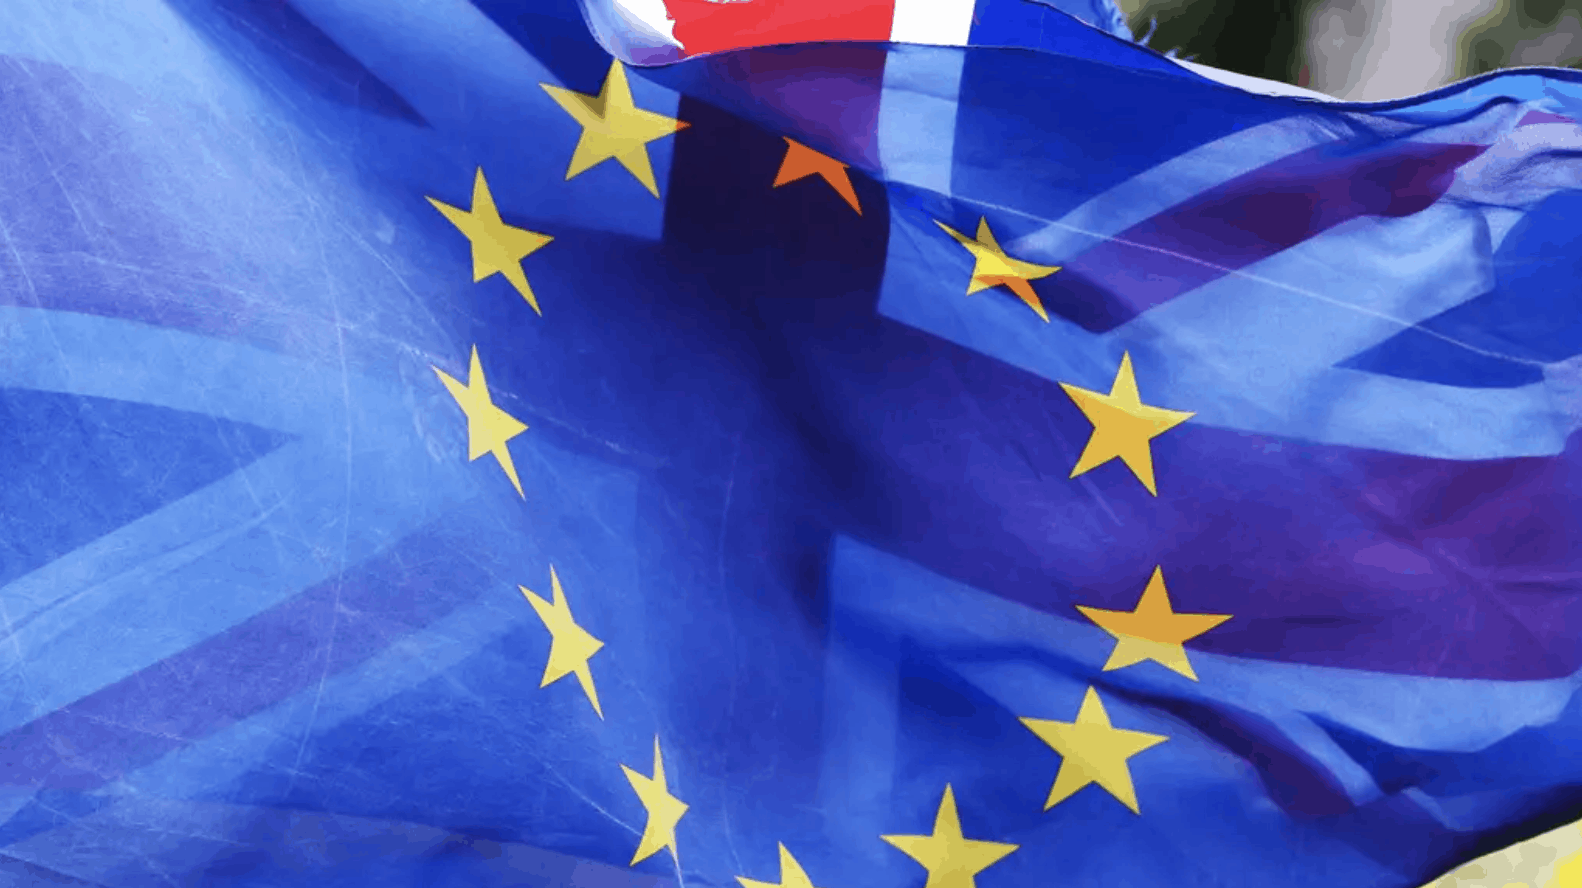 Reactions: Right-wing journalist tells EU countries to be grateful for UK’s WWII contribution